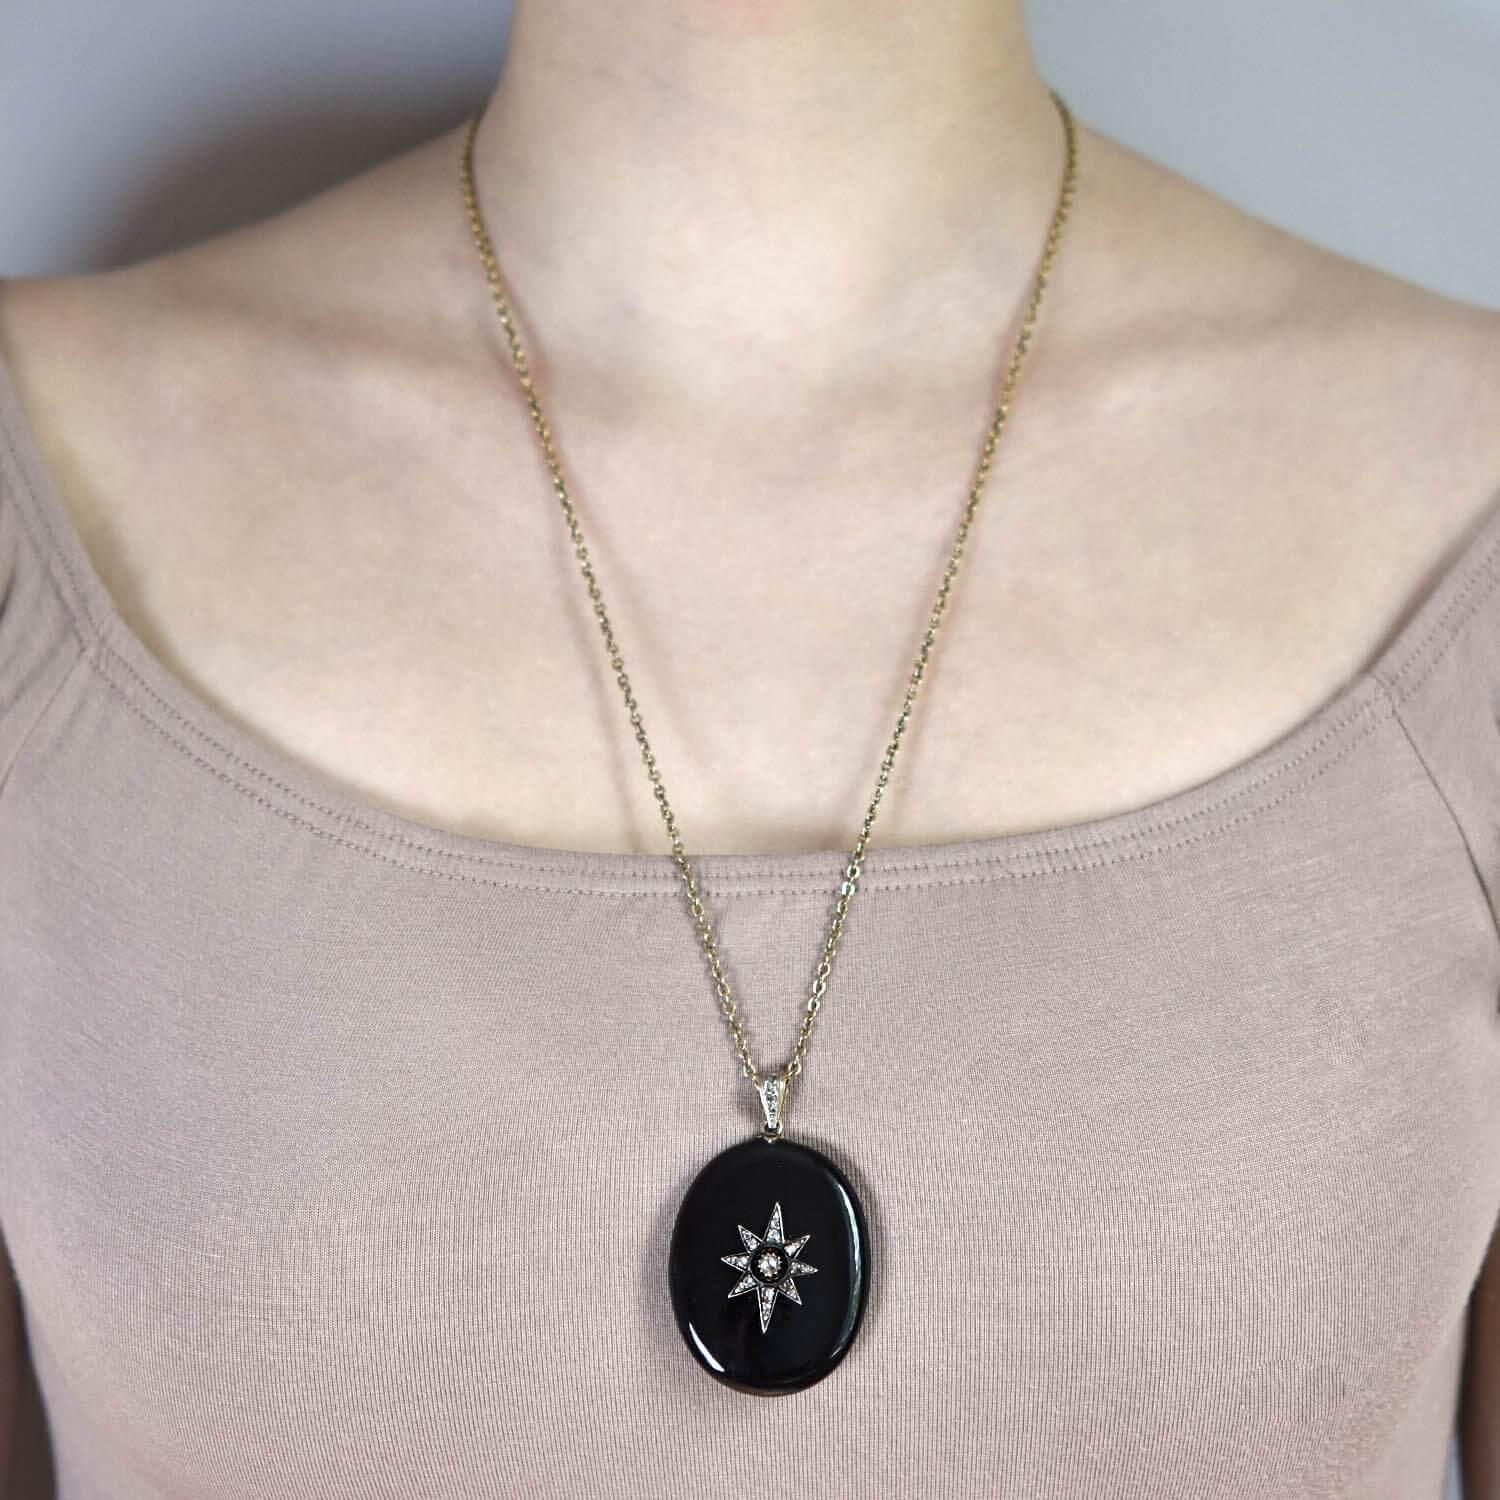 Victorian 14kt/Sterling Onyx Locket with Diamond Starburst Locket Pendant 0.80ct In Fair Condition For Sale In Narberth, PA